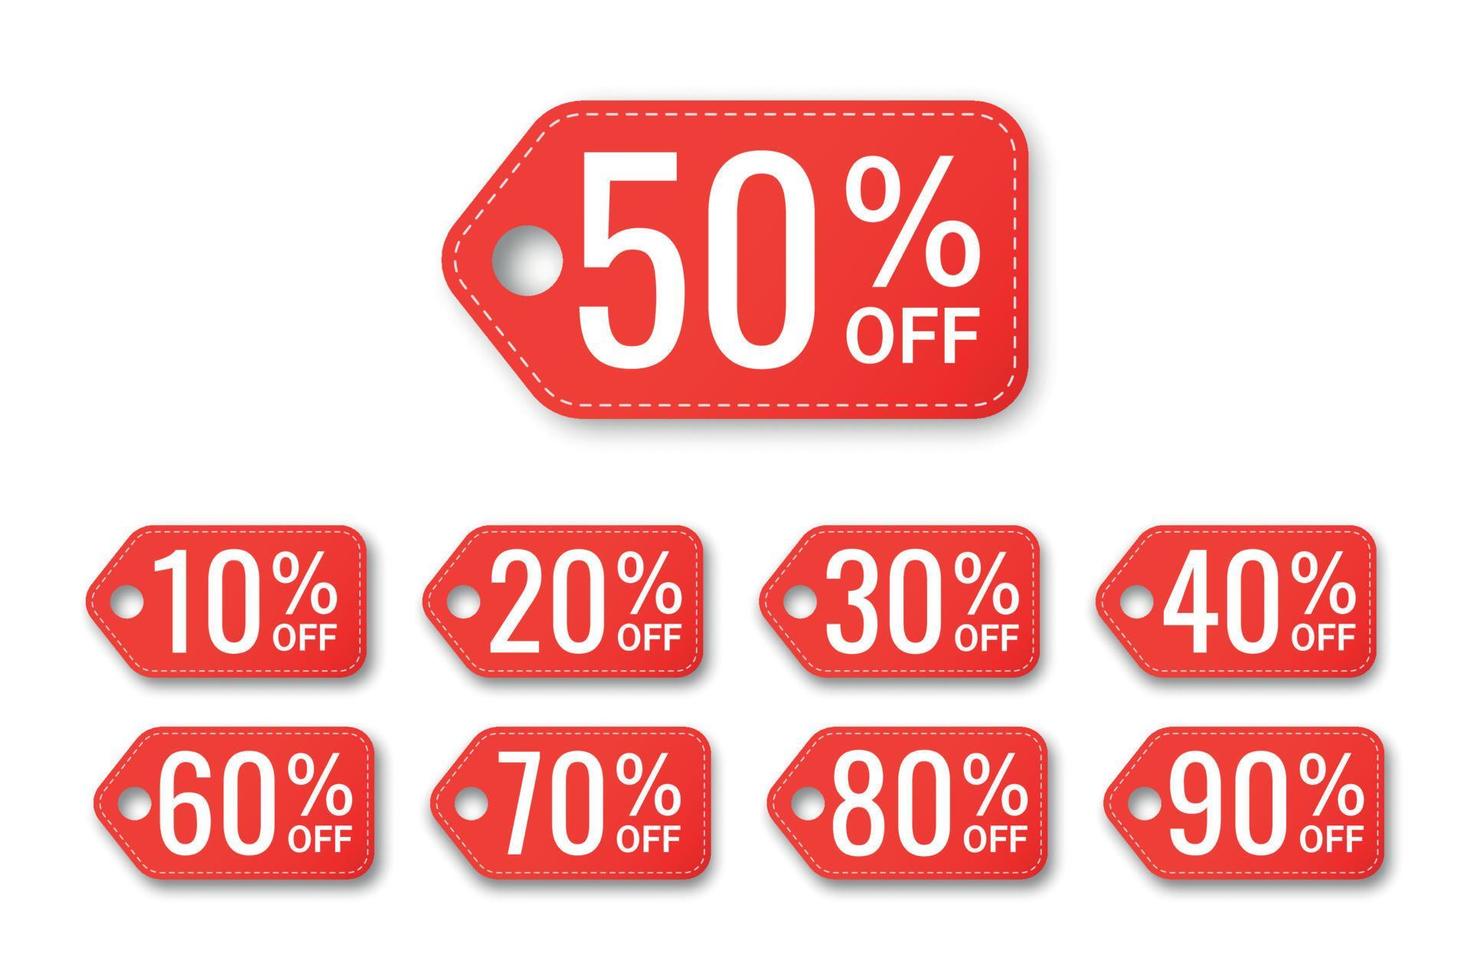 Set of red color tags with percentage discounts for sale. 10, 20, 30, 40, 50, 60, 70, 80, 90. Red tag, coupon, label, price tag, sticker or banner. Vector illustration isolated on white background.